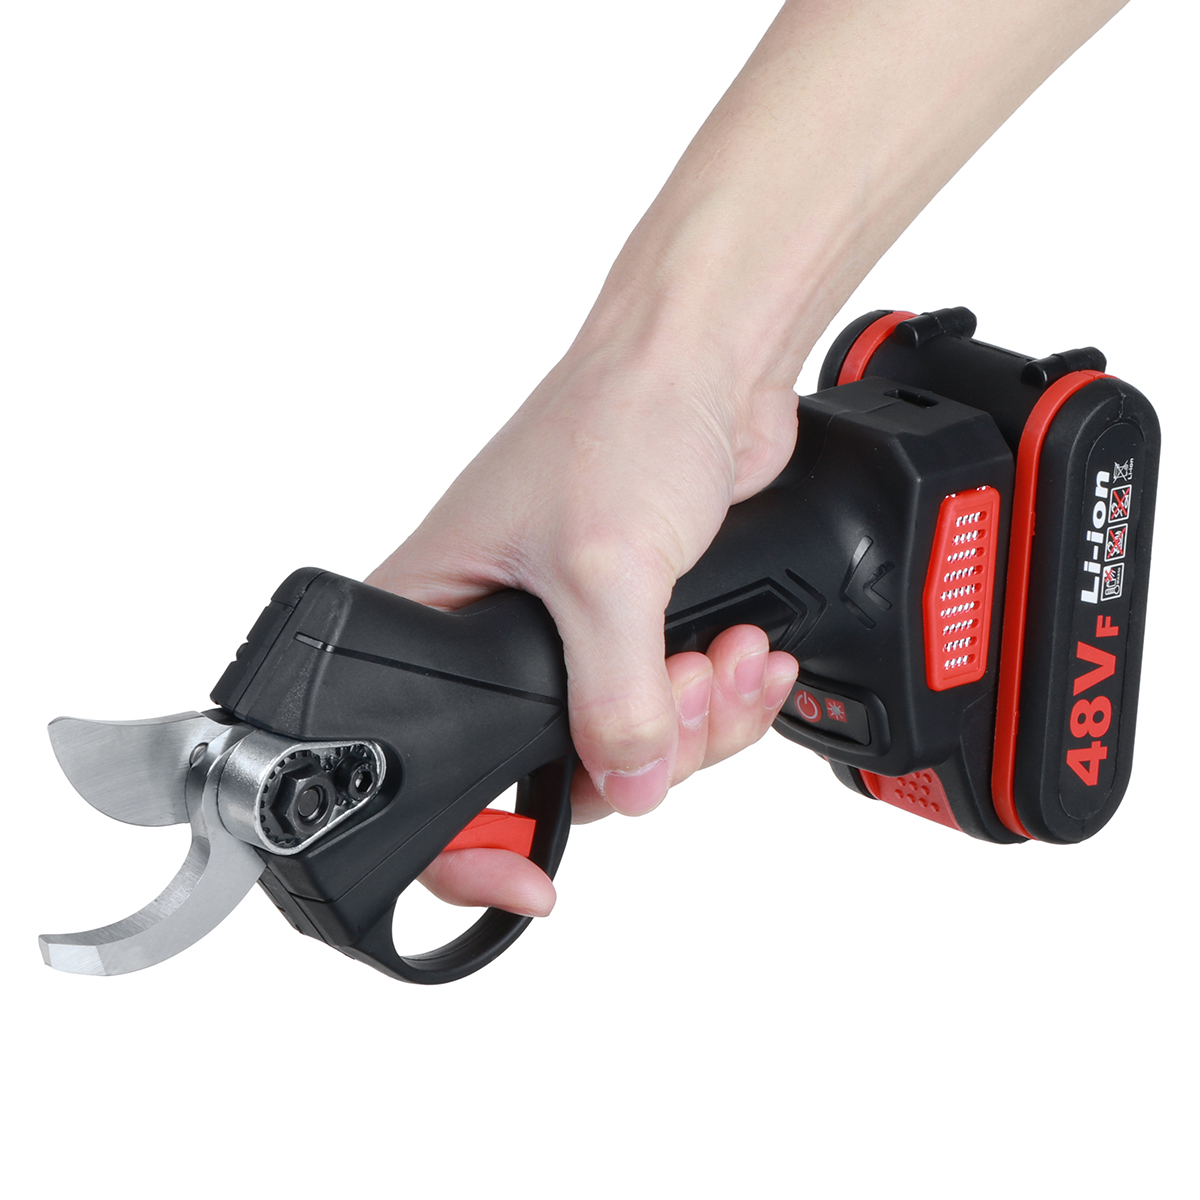 21V-Electric-Pruning-Shears-Rechargeable-Garden-Branches-Scissors-Cutter-Tree-Trimming-Cutting-Tool--1666113-7